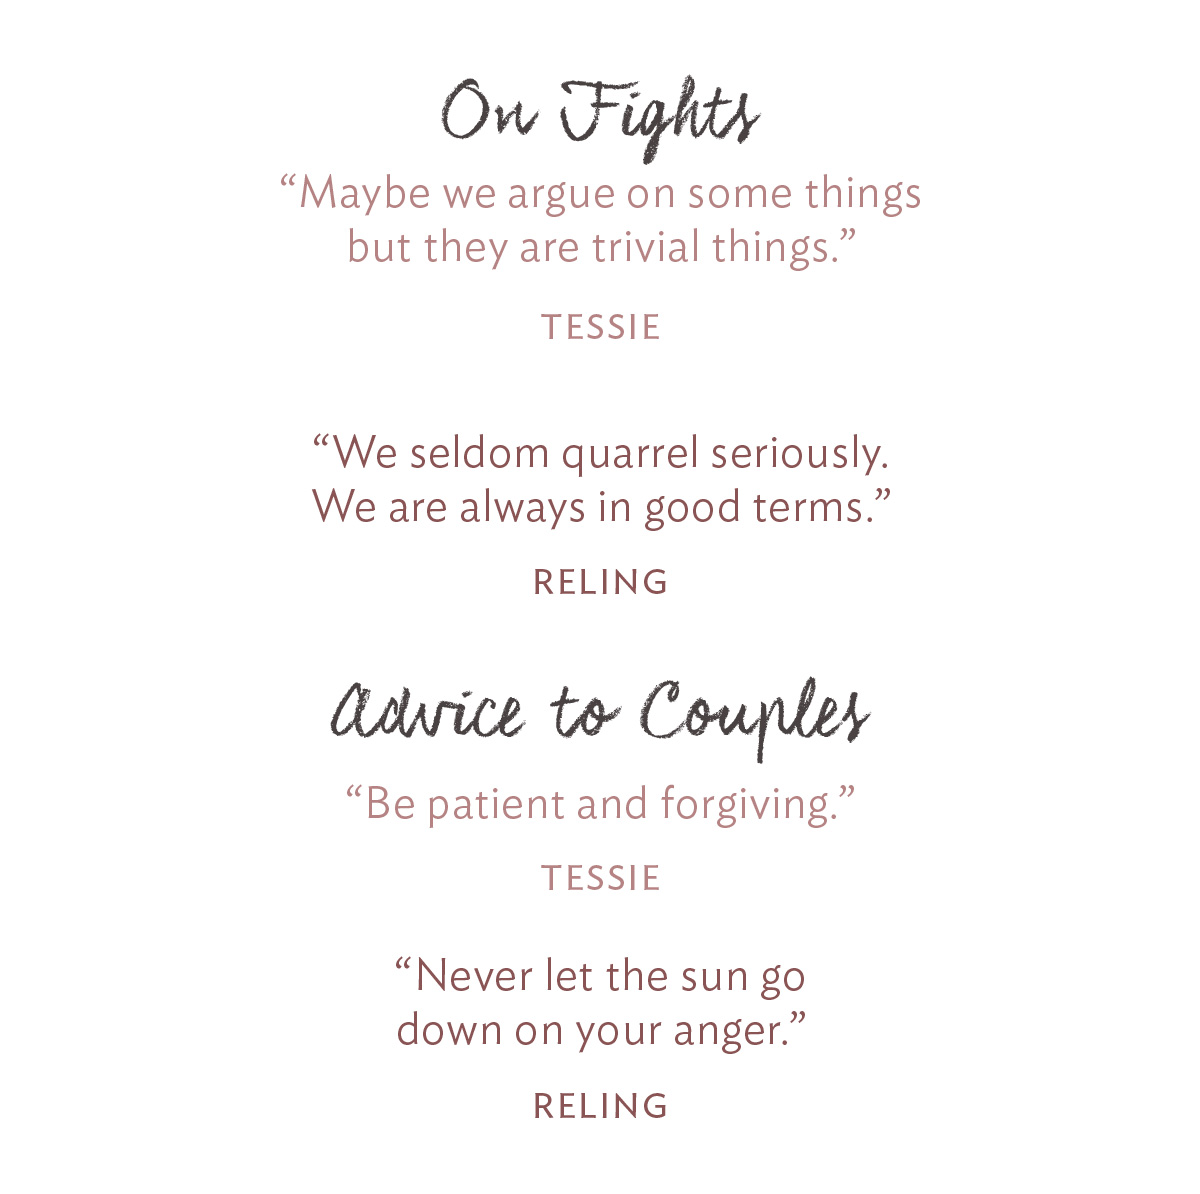 On Fights: “Maybe we argue on some things but they are trivial things.” -Tessie “We seldom quarrel seriously. We are always in good terms.” -Reling Advice to Couples: “Never let the sun go down on your anger.” -Reling “Be patient and forgiving.” -Tessie